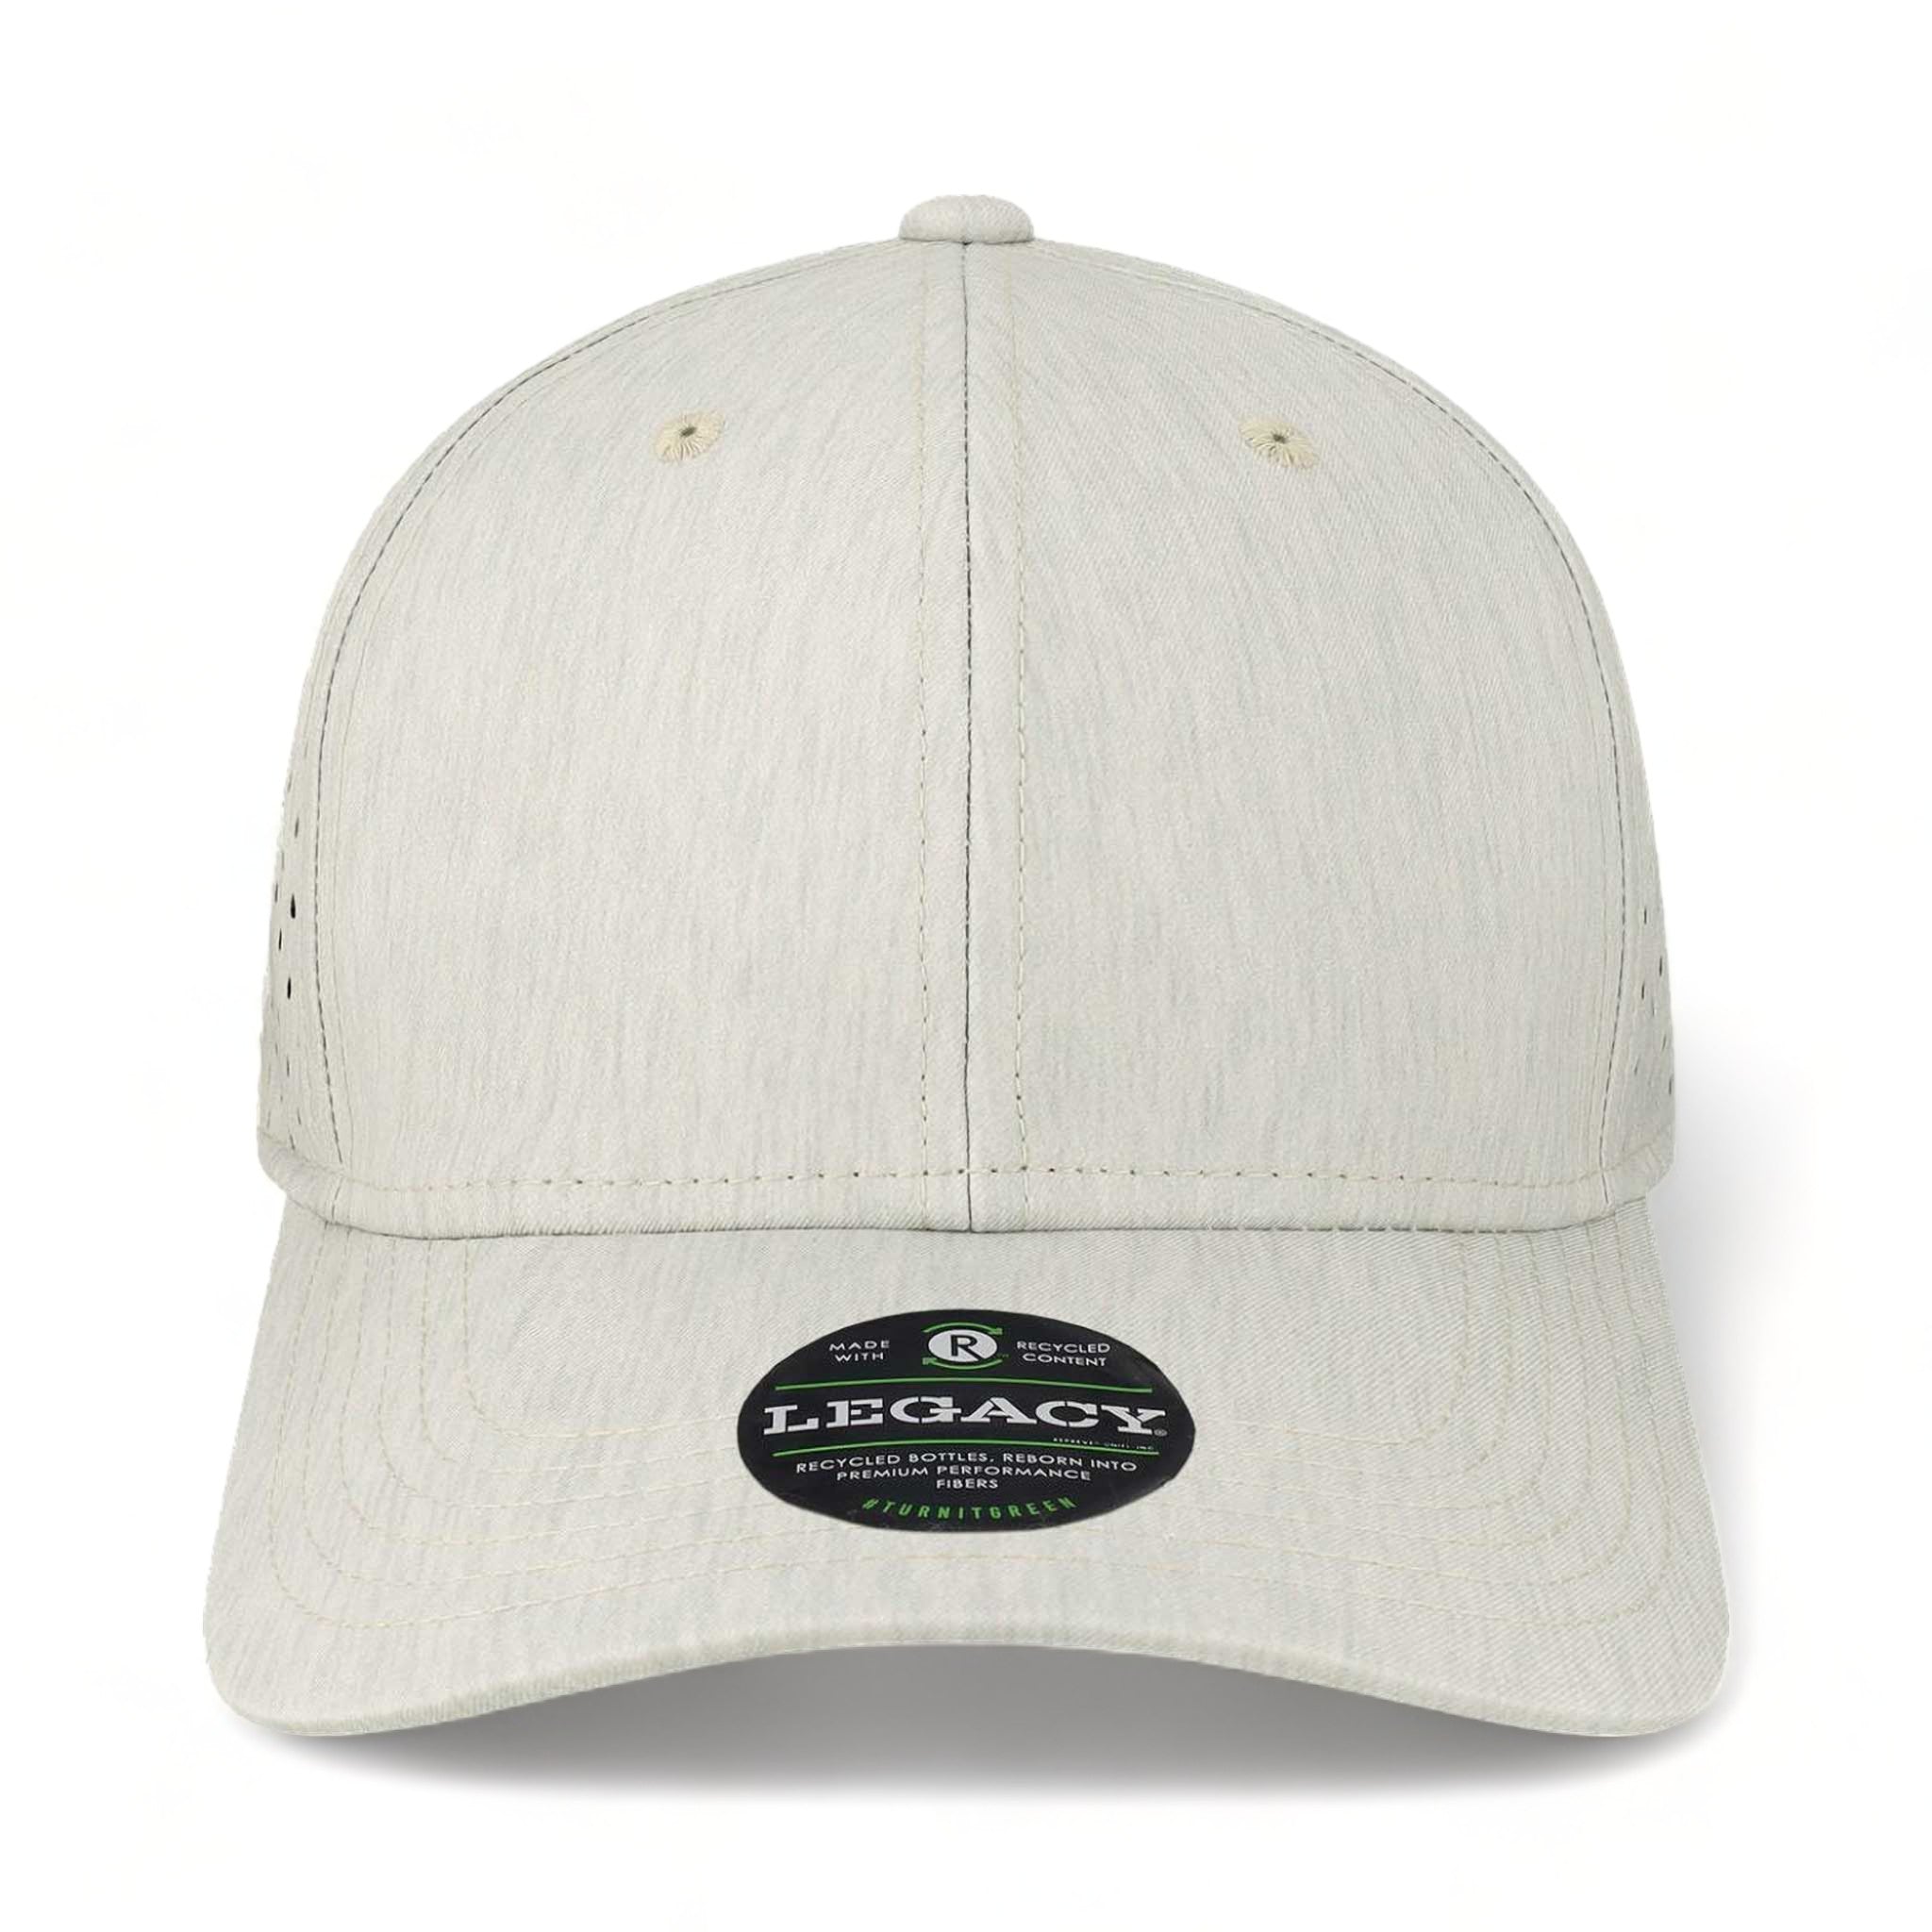 Front view of LEGACY REMPA custom hat in eco sand